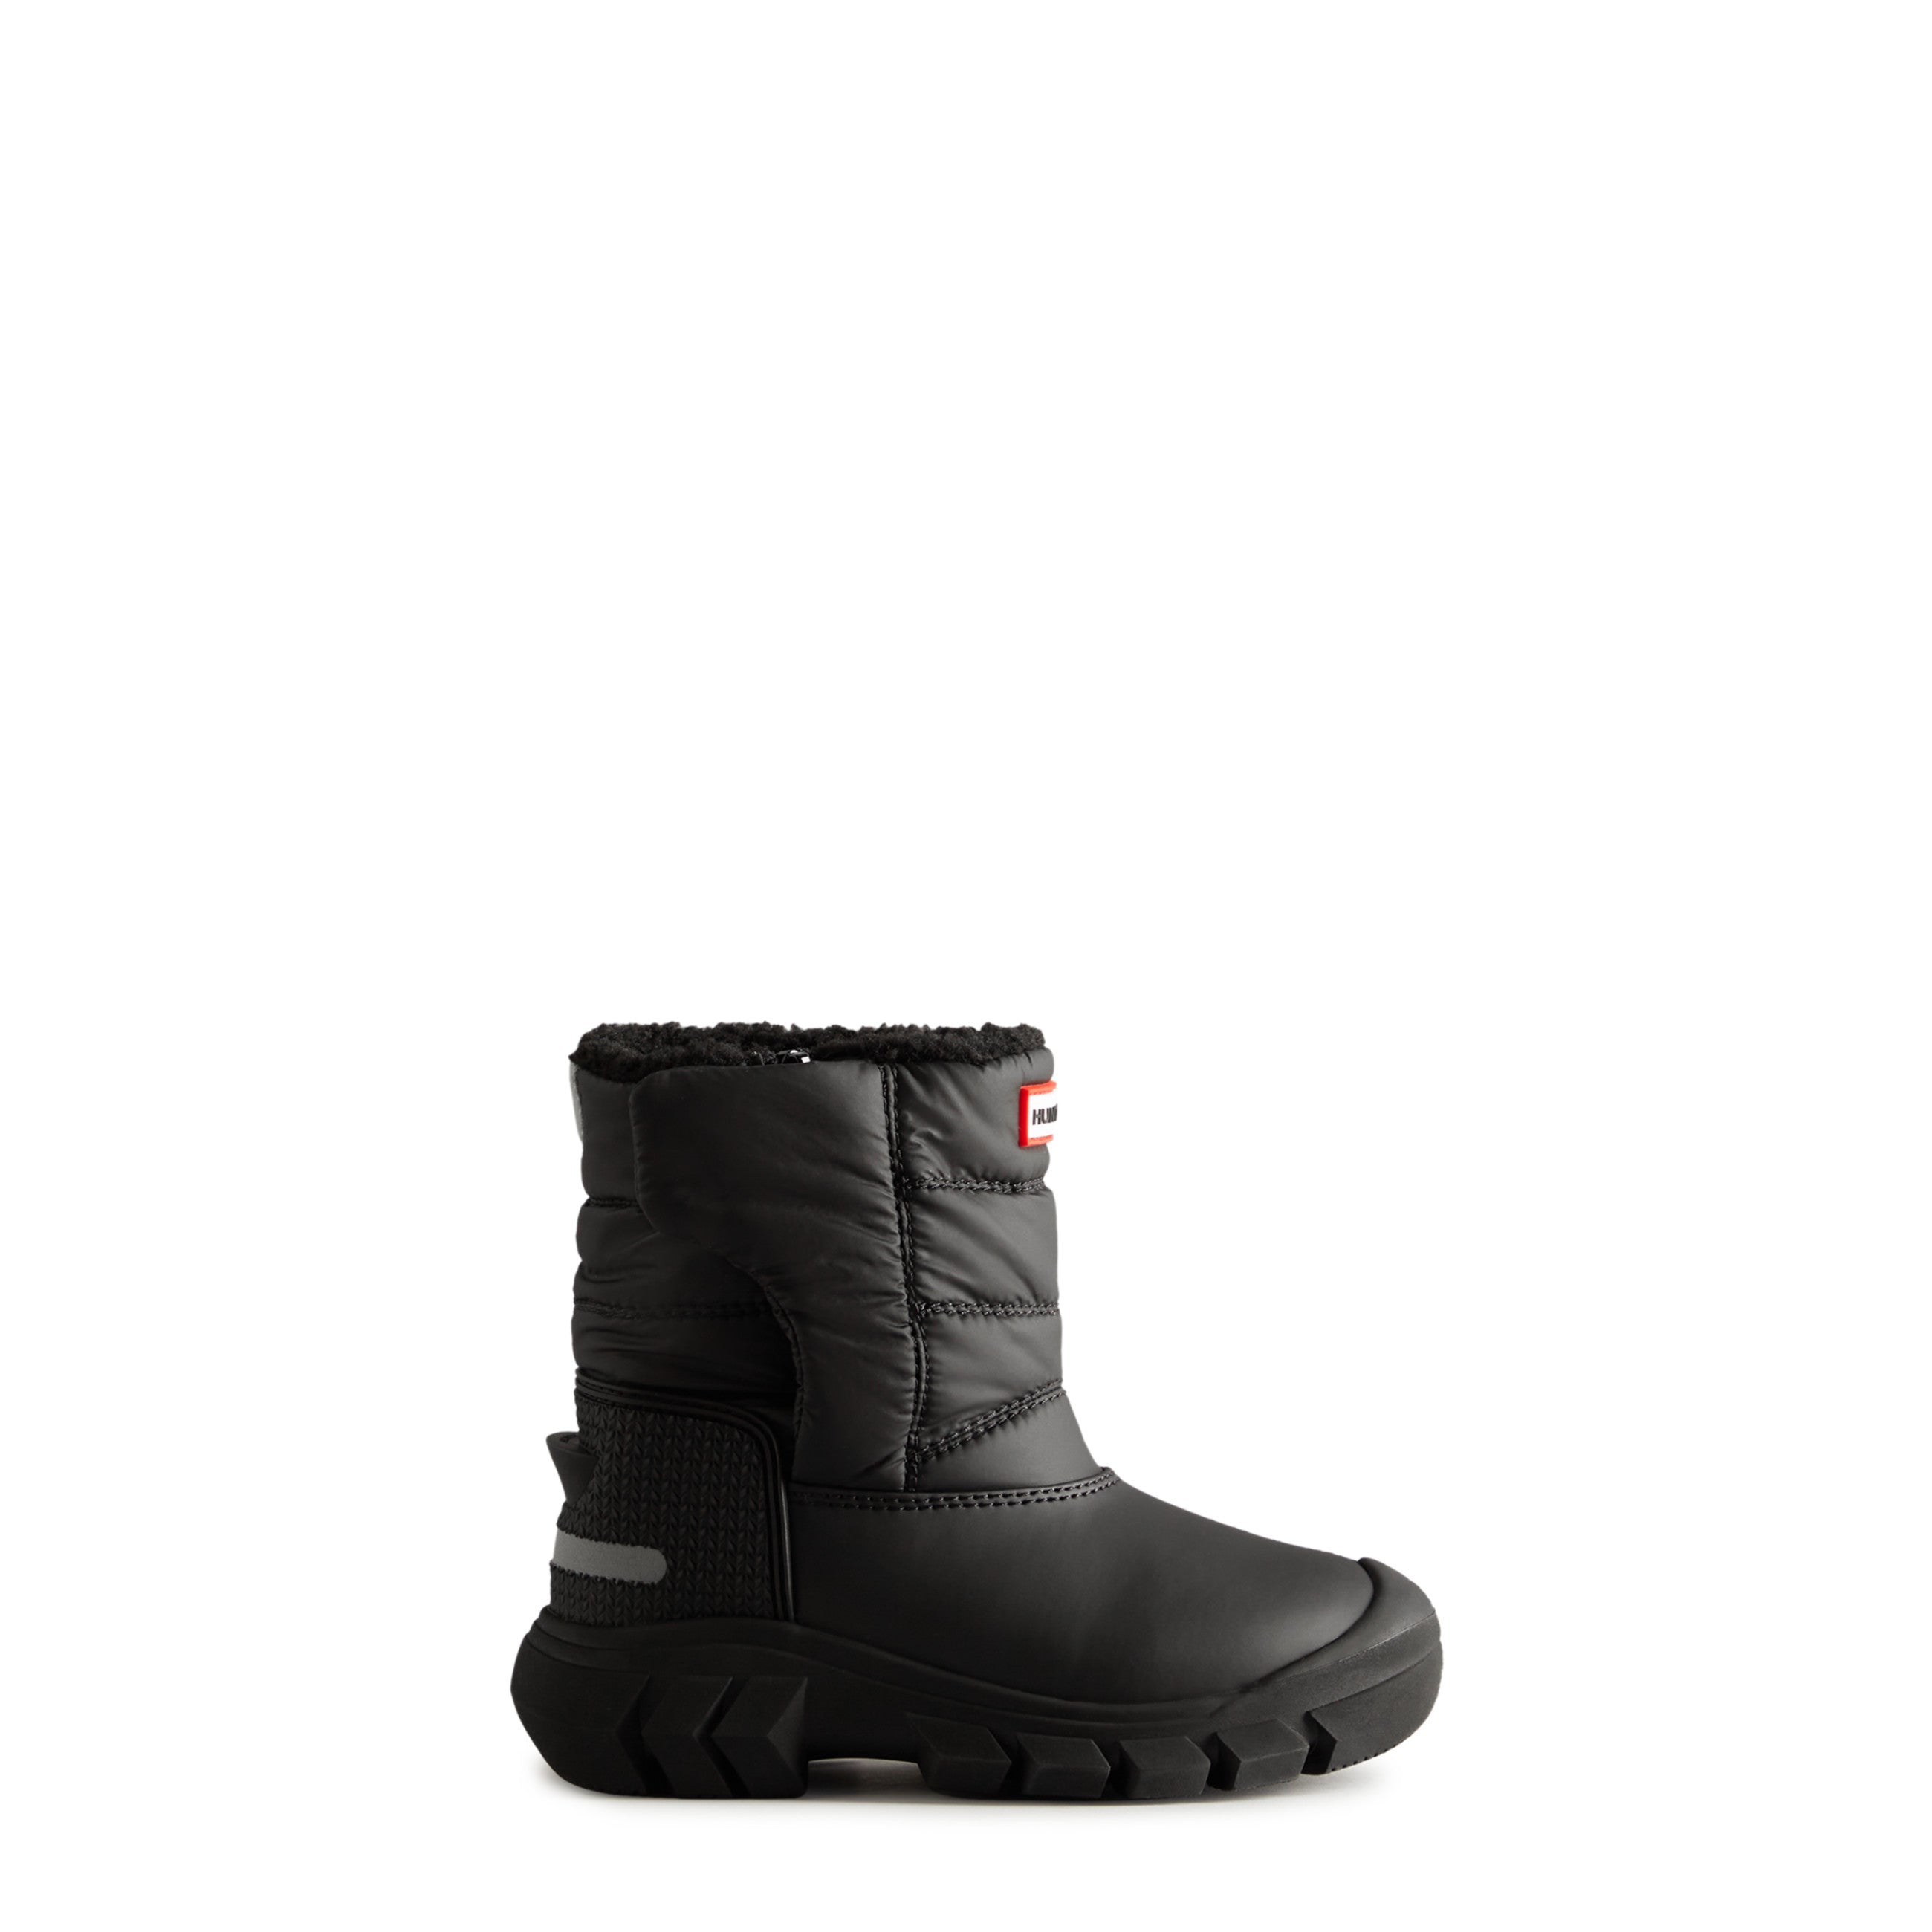 Little Kids Insulated Snow Boots